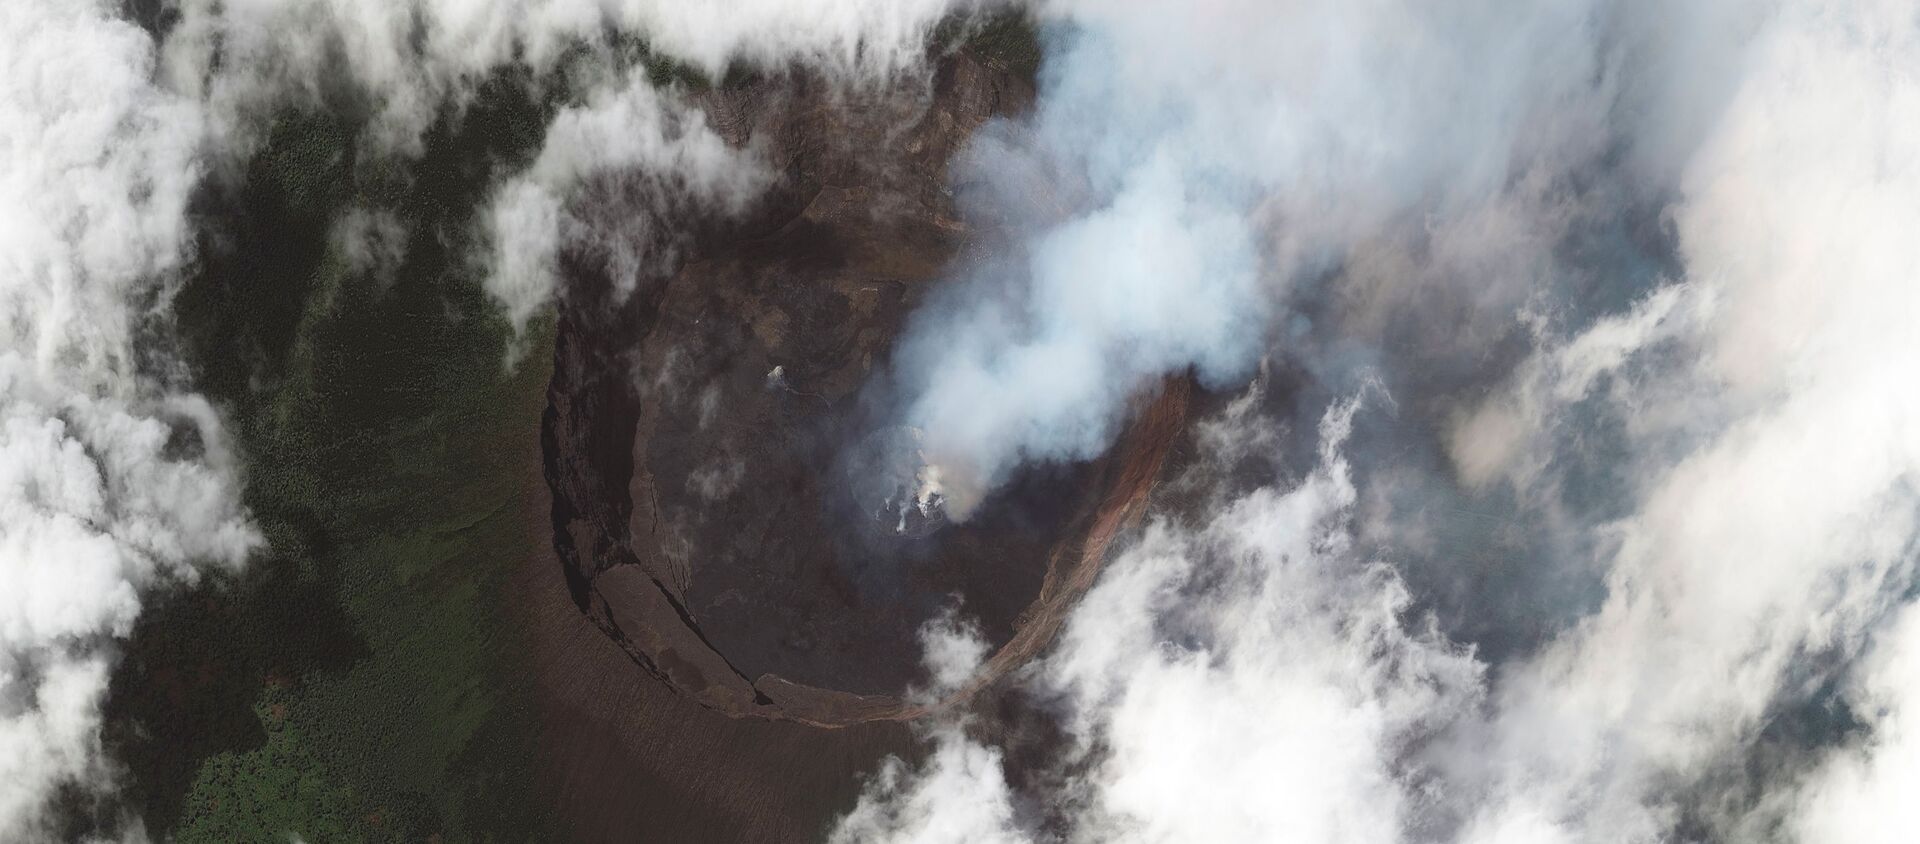 Volcanic activity is seen in the crater at Mount Nyiragongo near Goma, in the Democratic Republic of Congo May 25, 2021. - Sputnik International, 1920, 29.05.2021